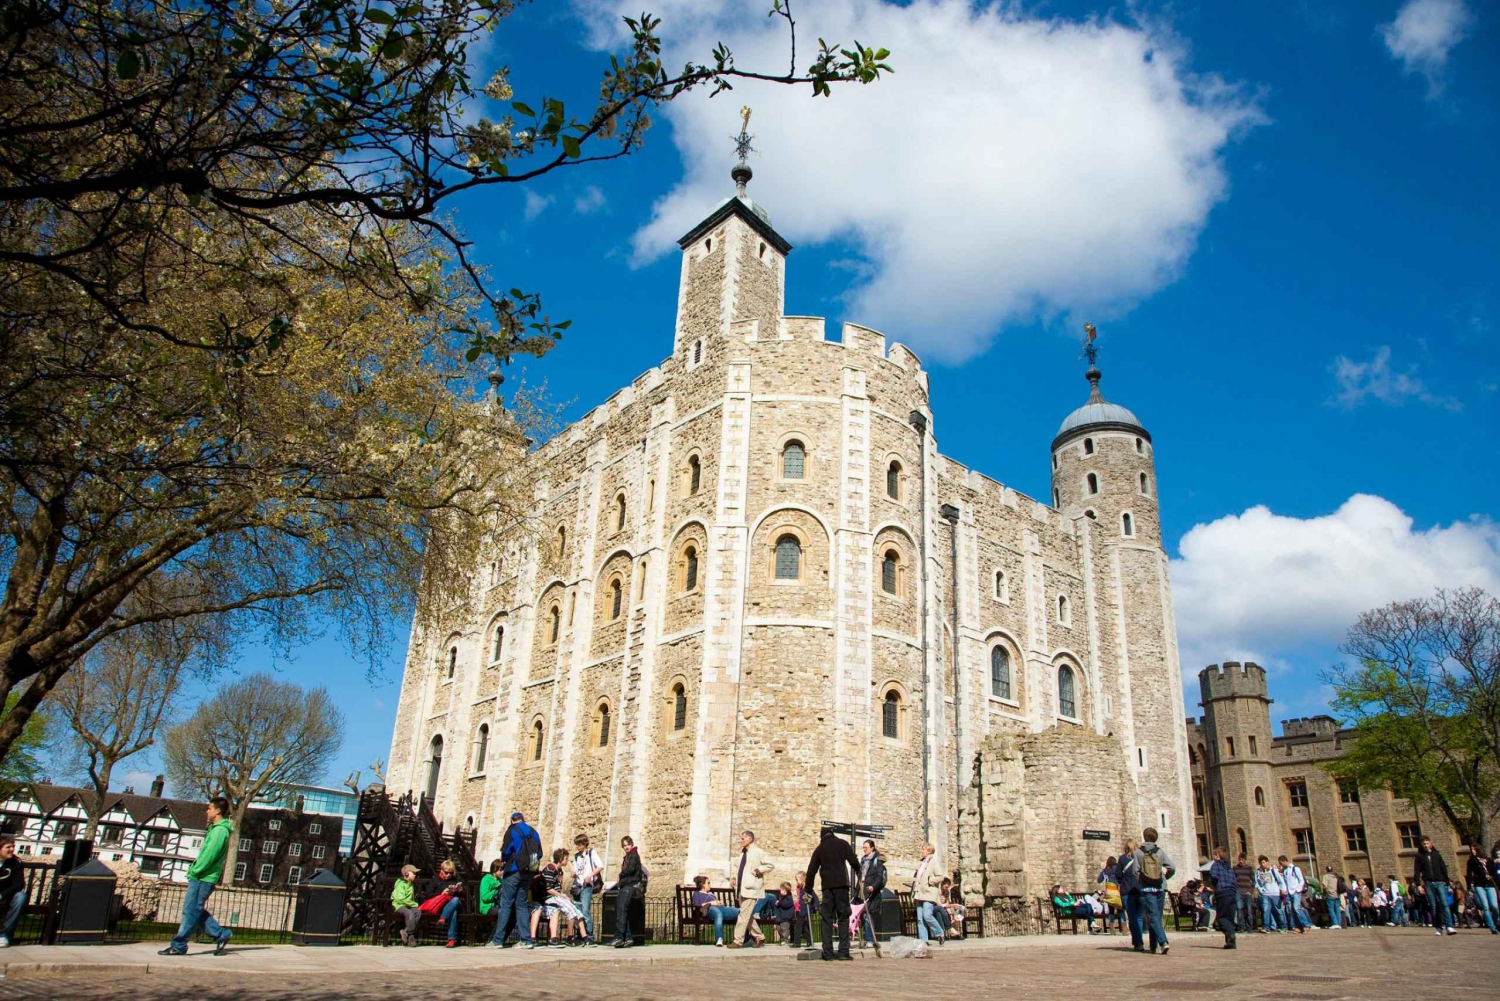 London: Tower of London, Hop-on, Hop-off Bus & River Cruise